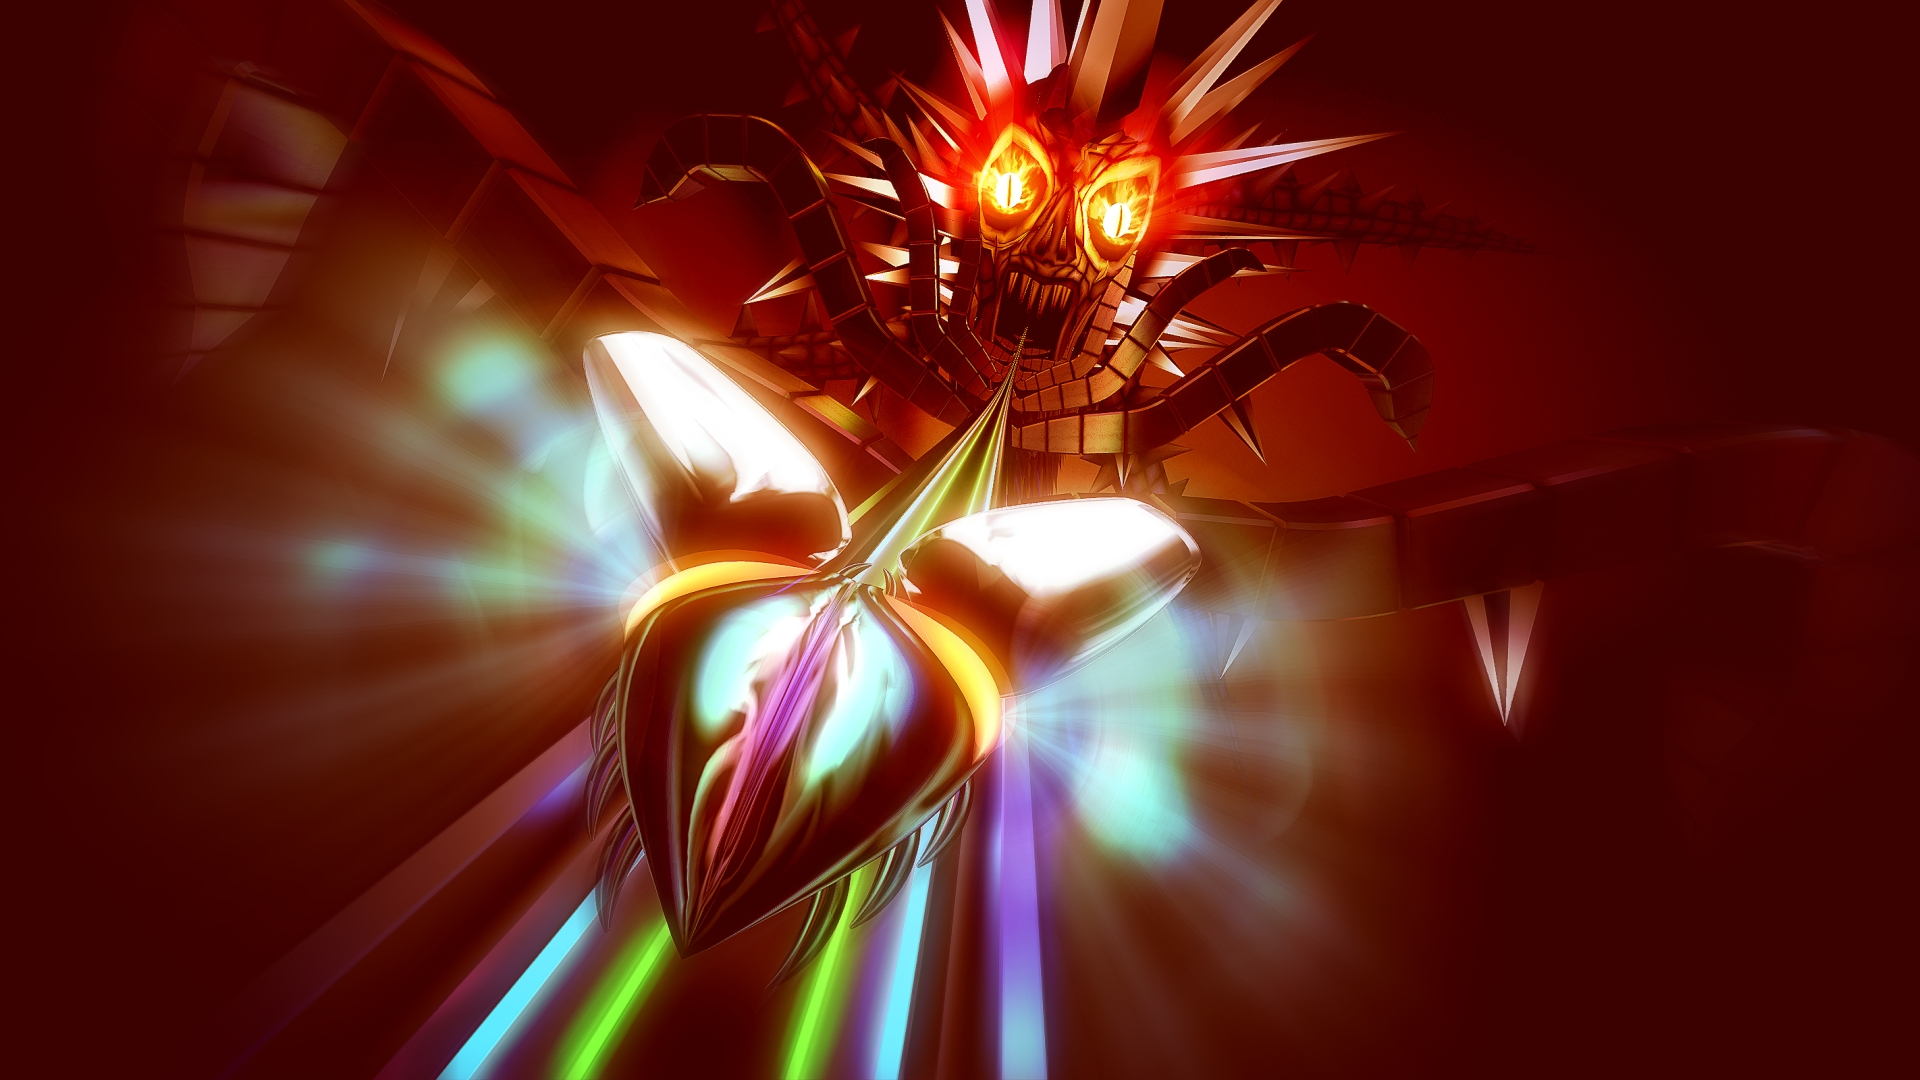 Psychedelic Shooter Thumper Gets PlayStation VR Support